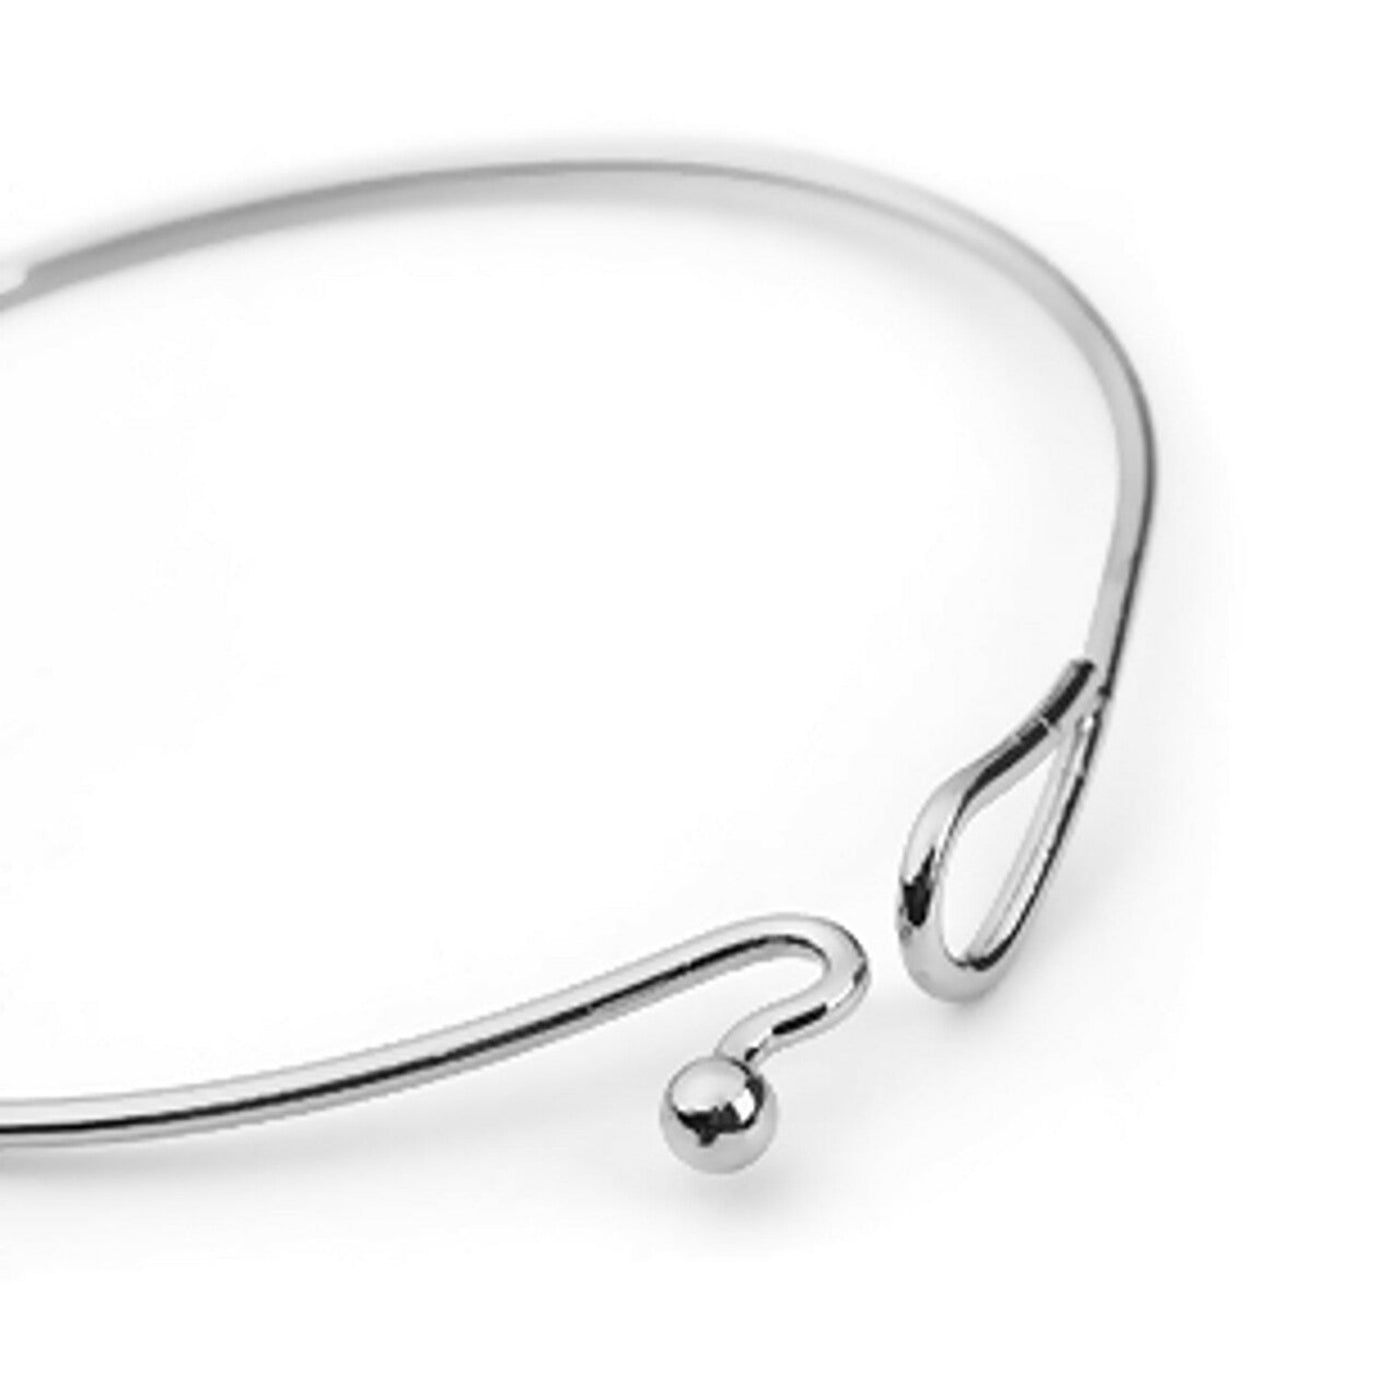 Women's Silver Plated Hoop Cuff Bangle In Gift Box.